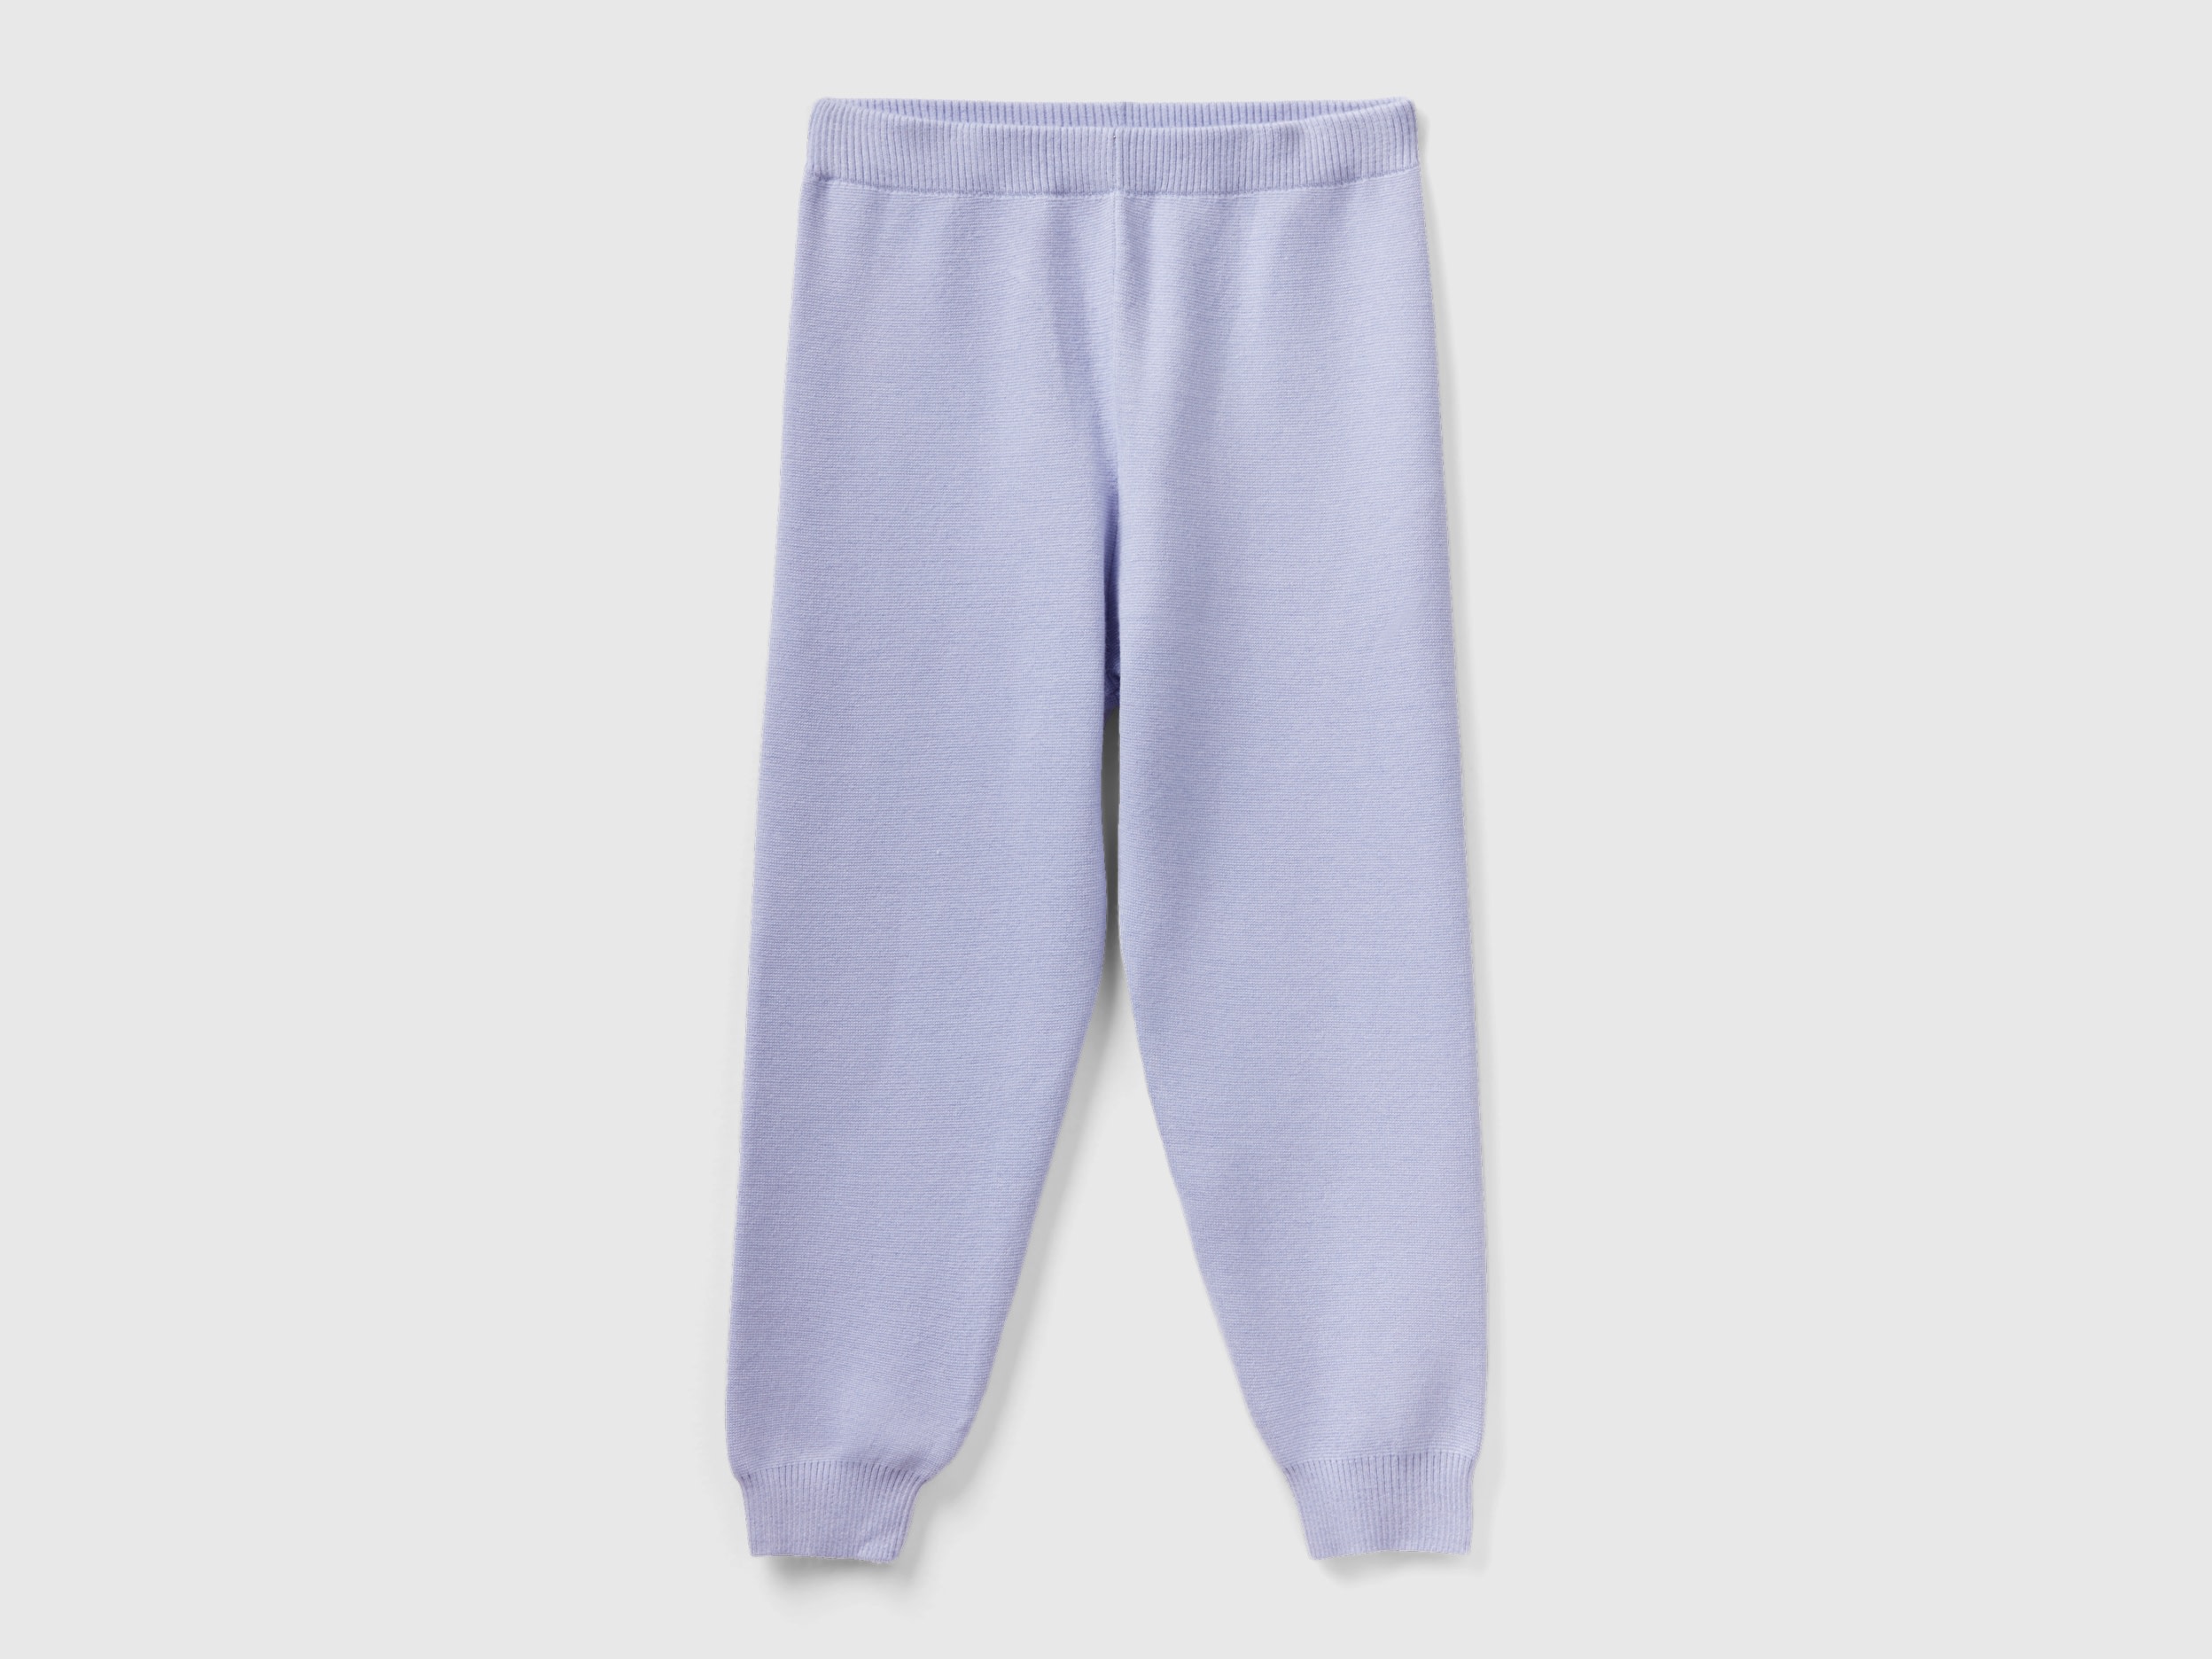 Benetton, Knit Trousers With Drawstring, size S, Lilac, Kids